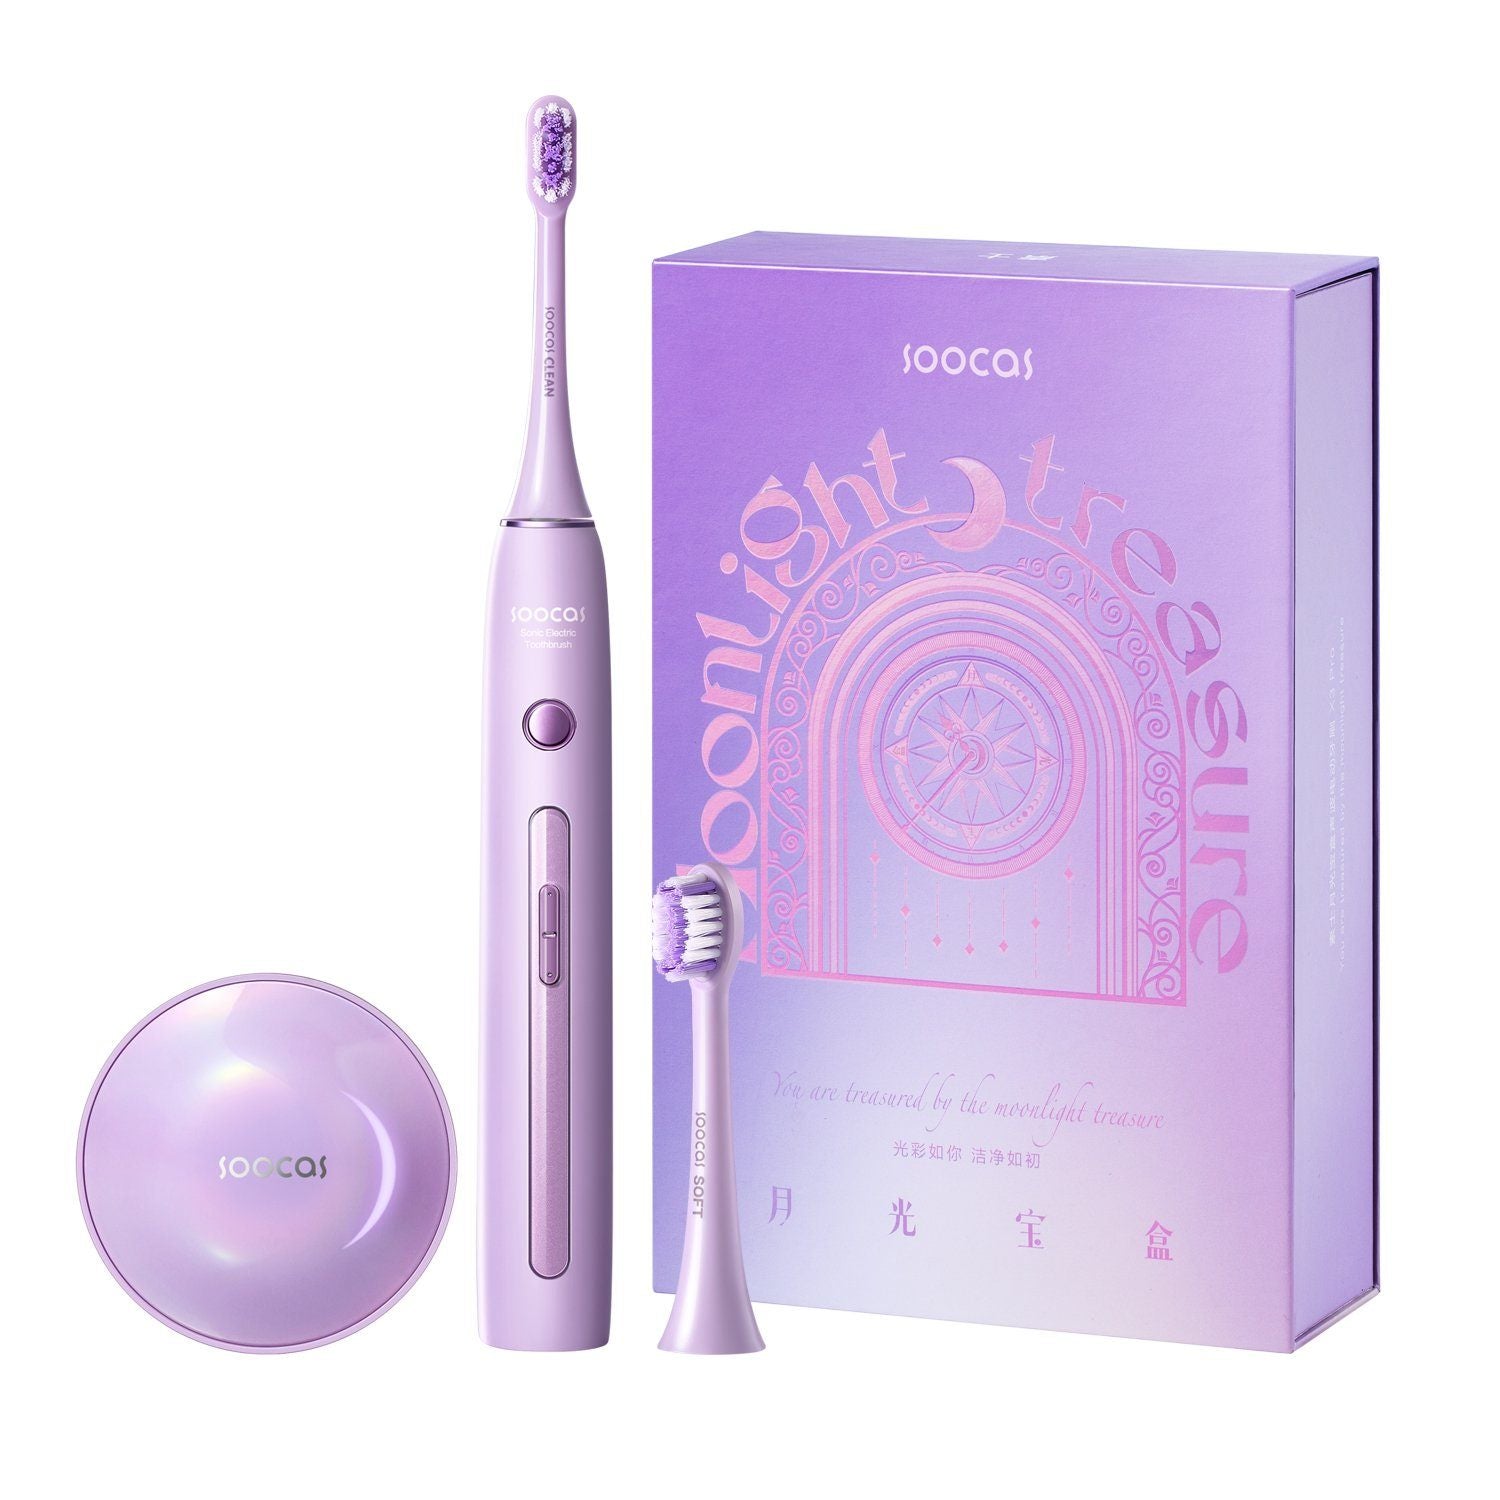 SOOCAS X3Pro Sonic Electric Toothbrush Whitening Sterilization with UVC Disinfection Box Default SOOCAS Purple 